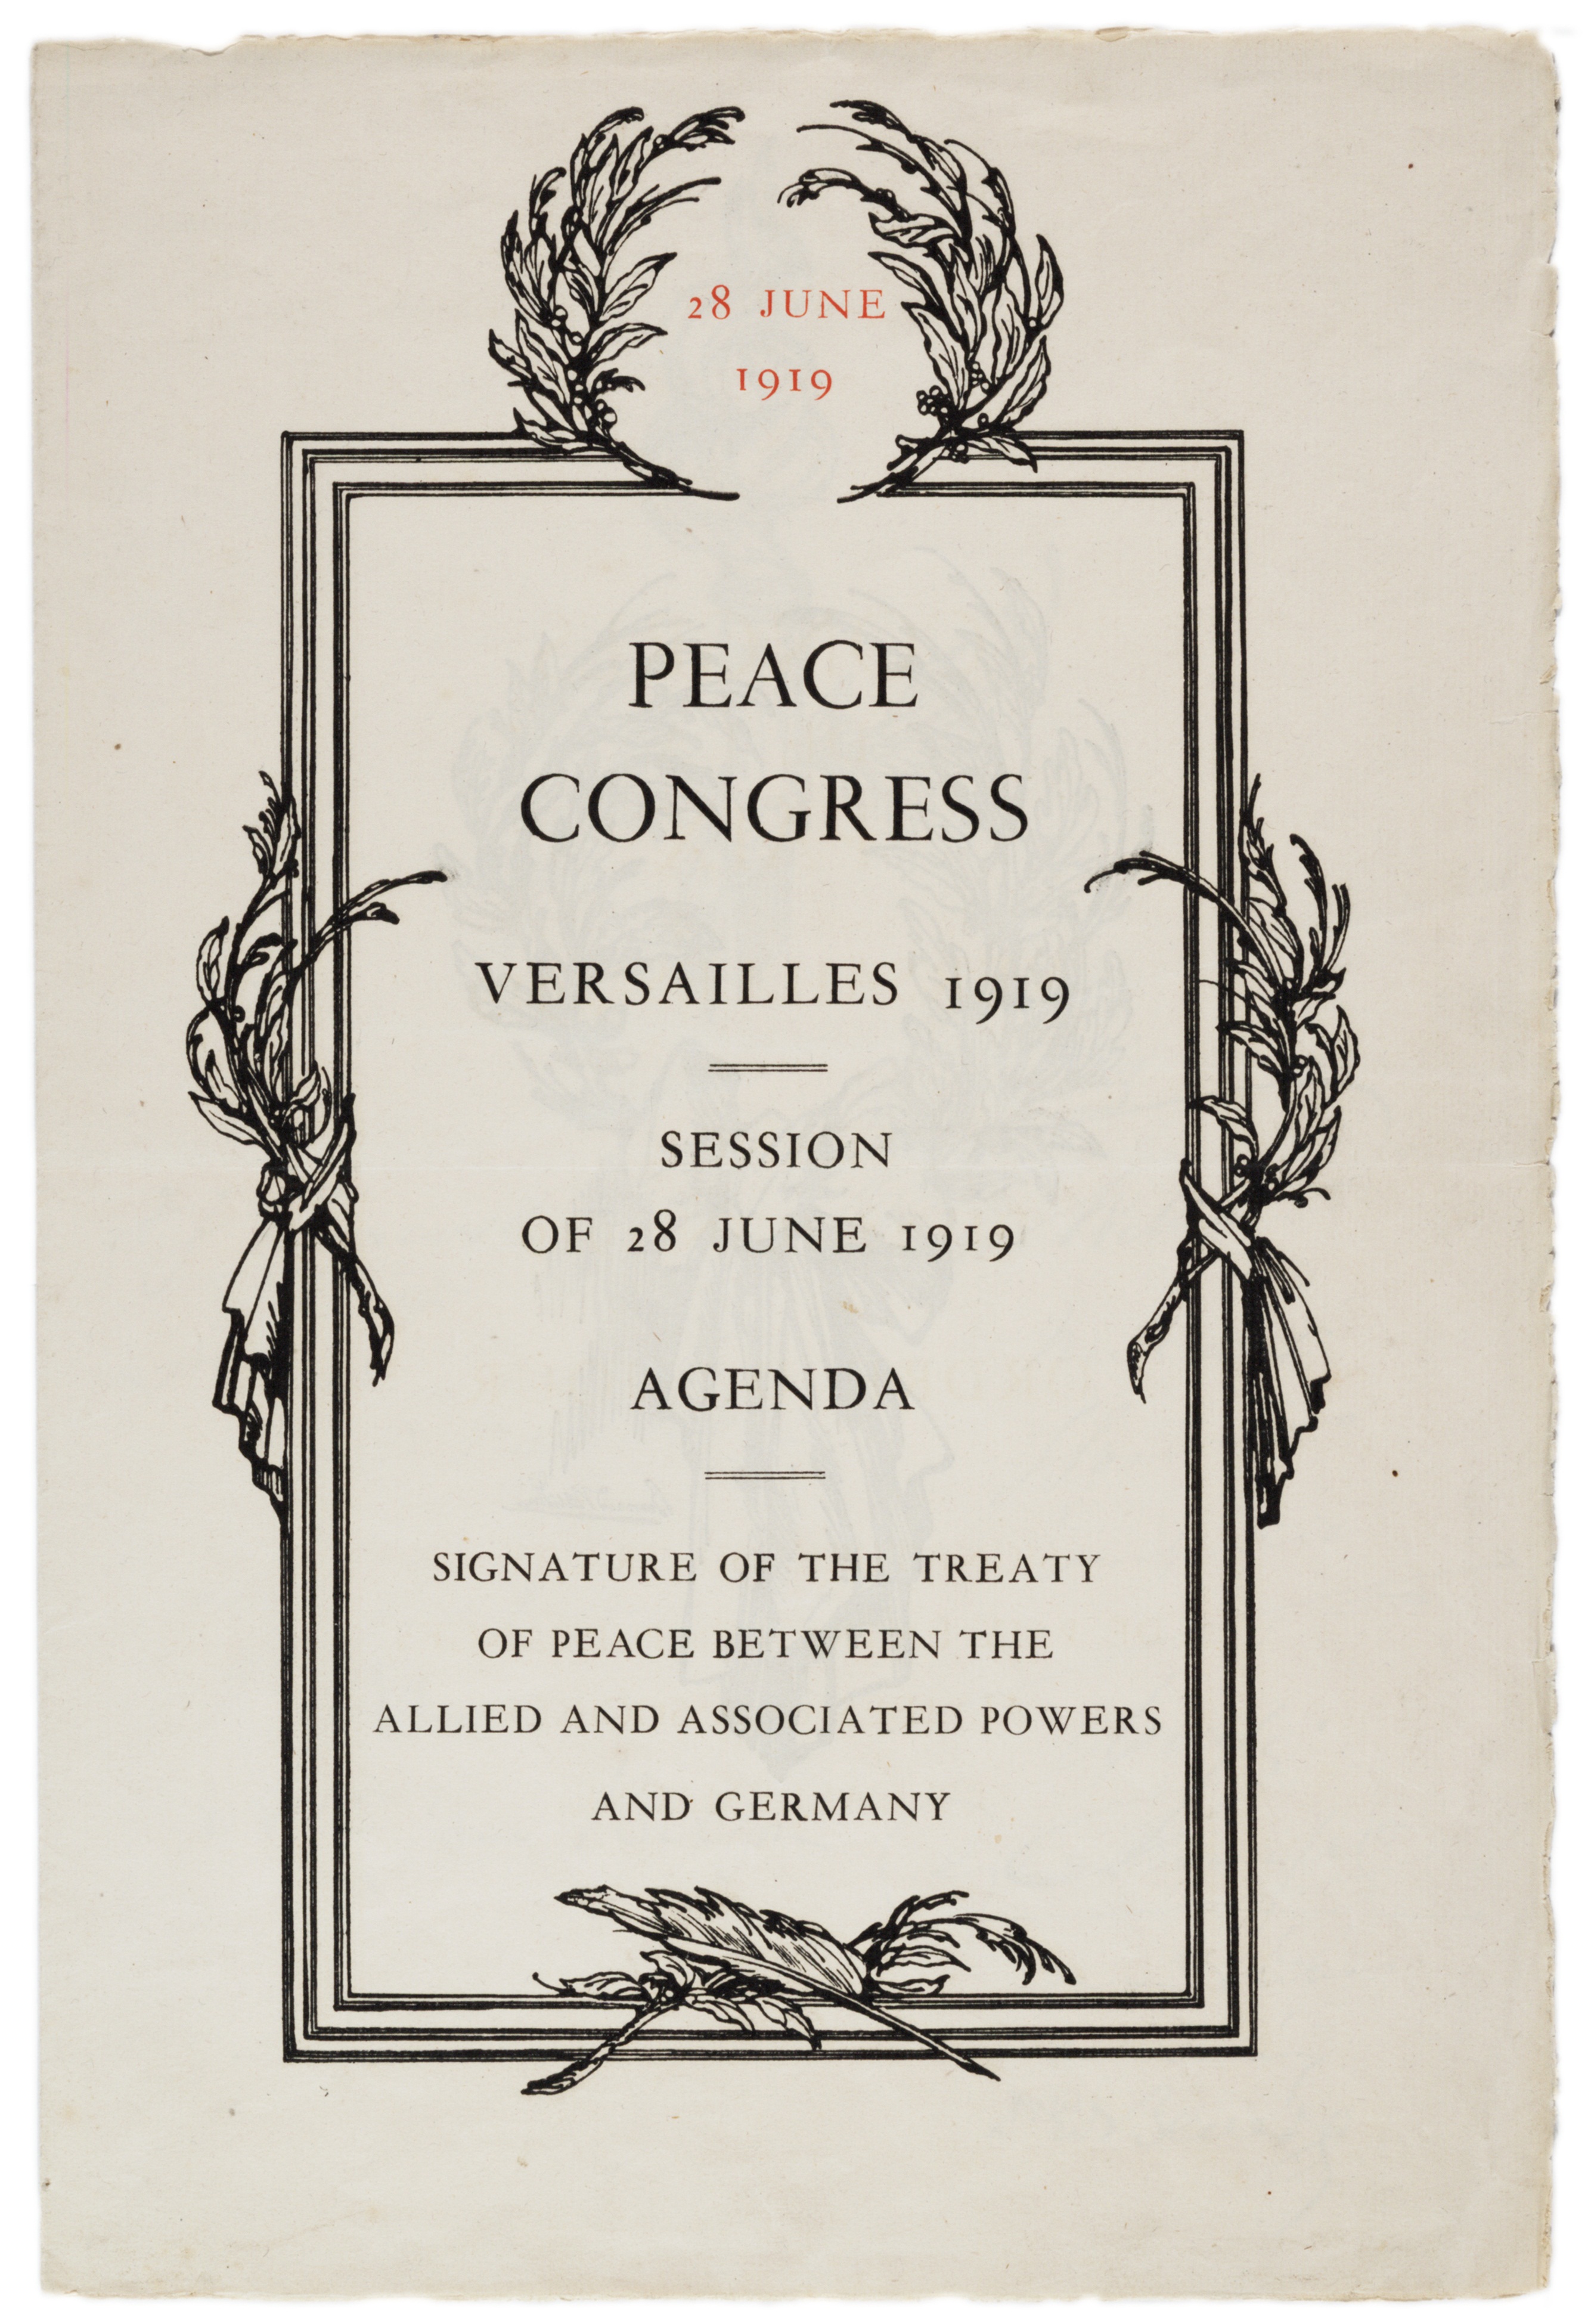 treaty-of-versailles-and-president-wilson-1919-and-1921-gilder